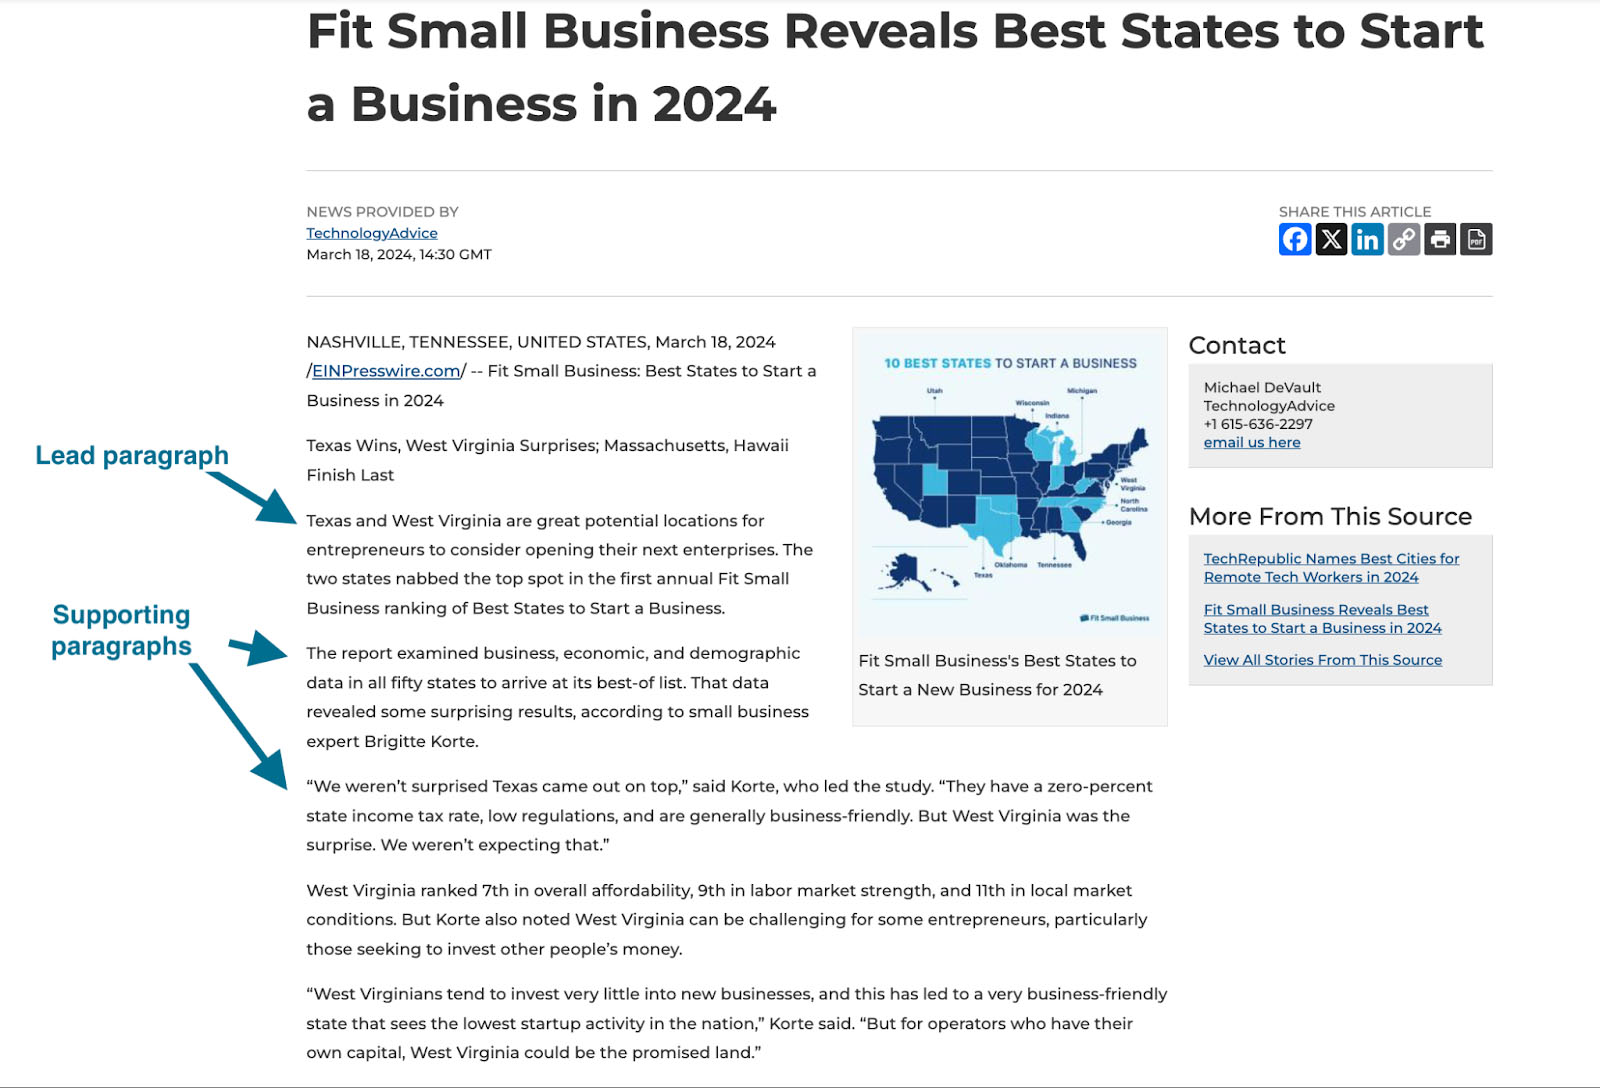  Sample press release from Fit Small Business with a lead and supporting paragraphs.